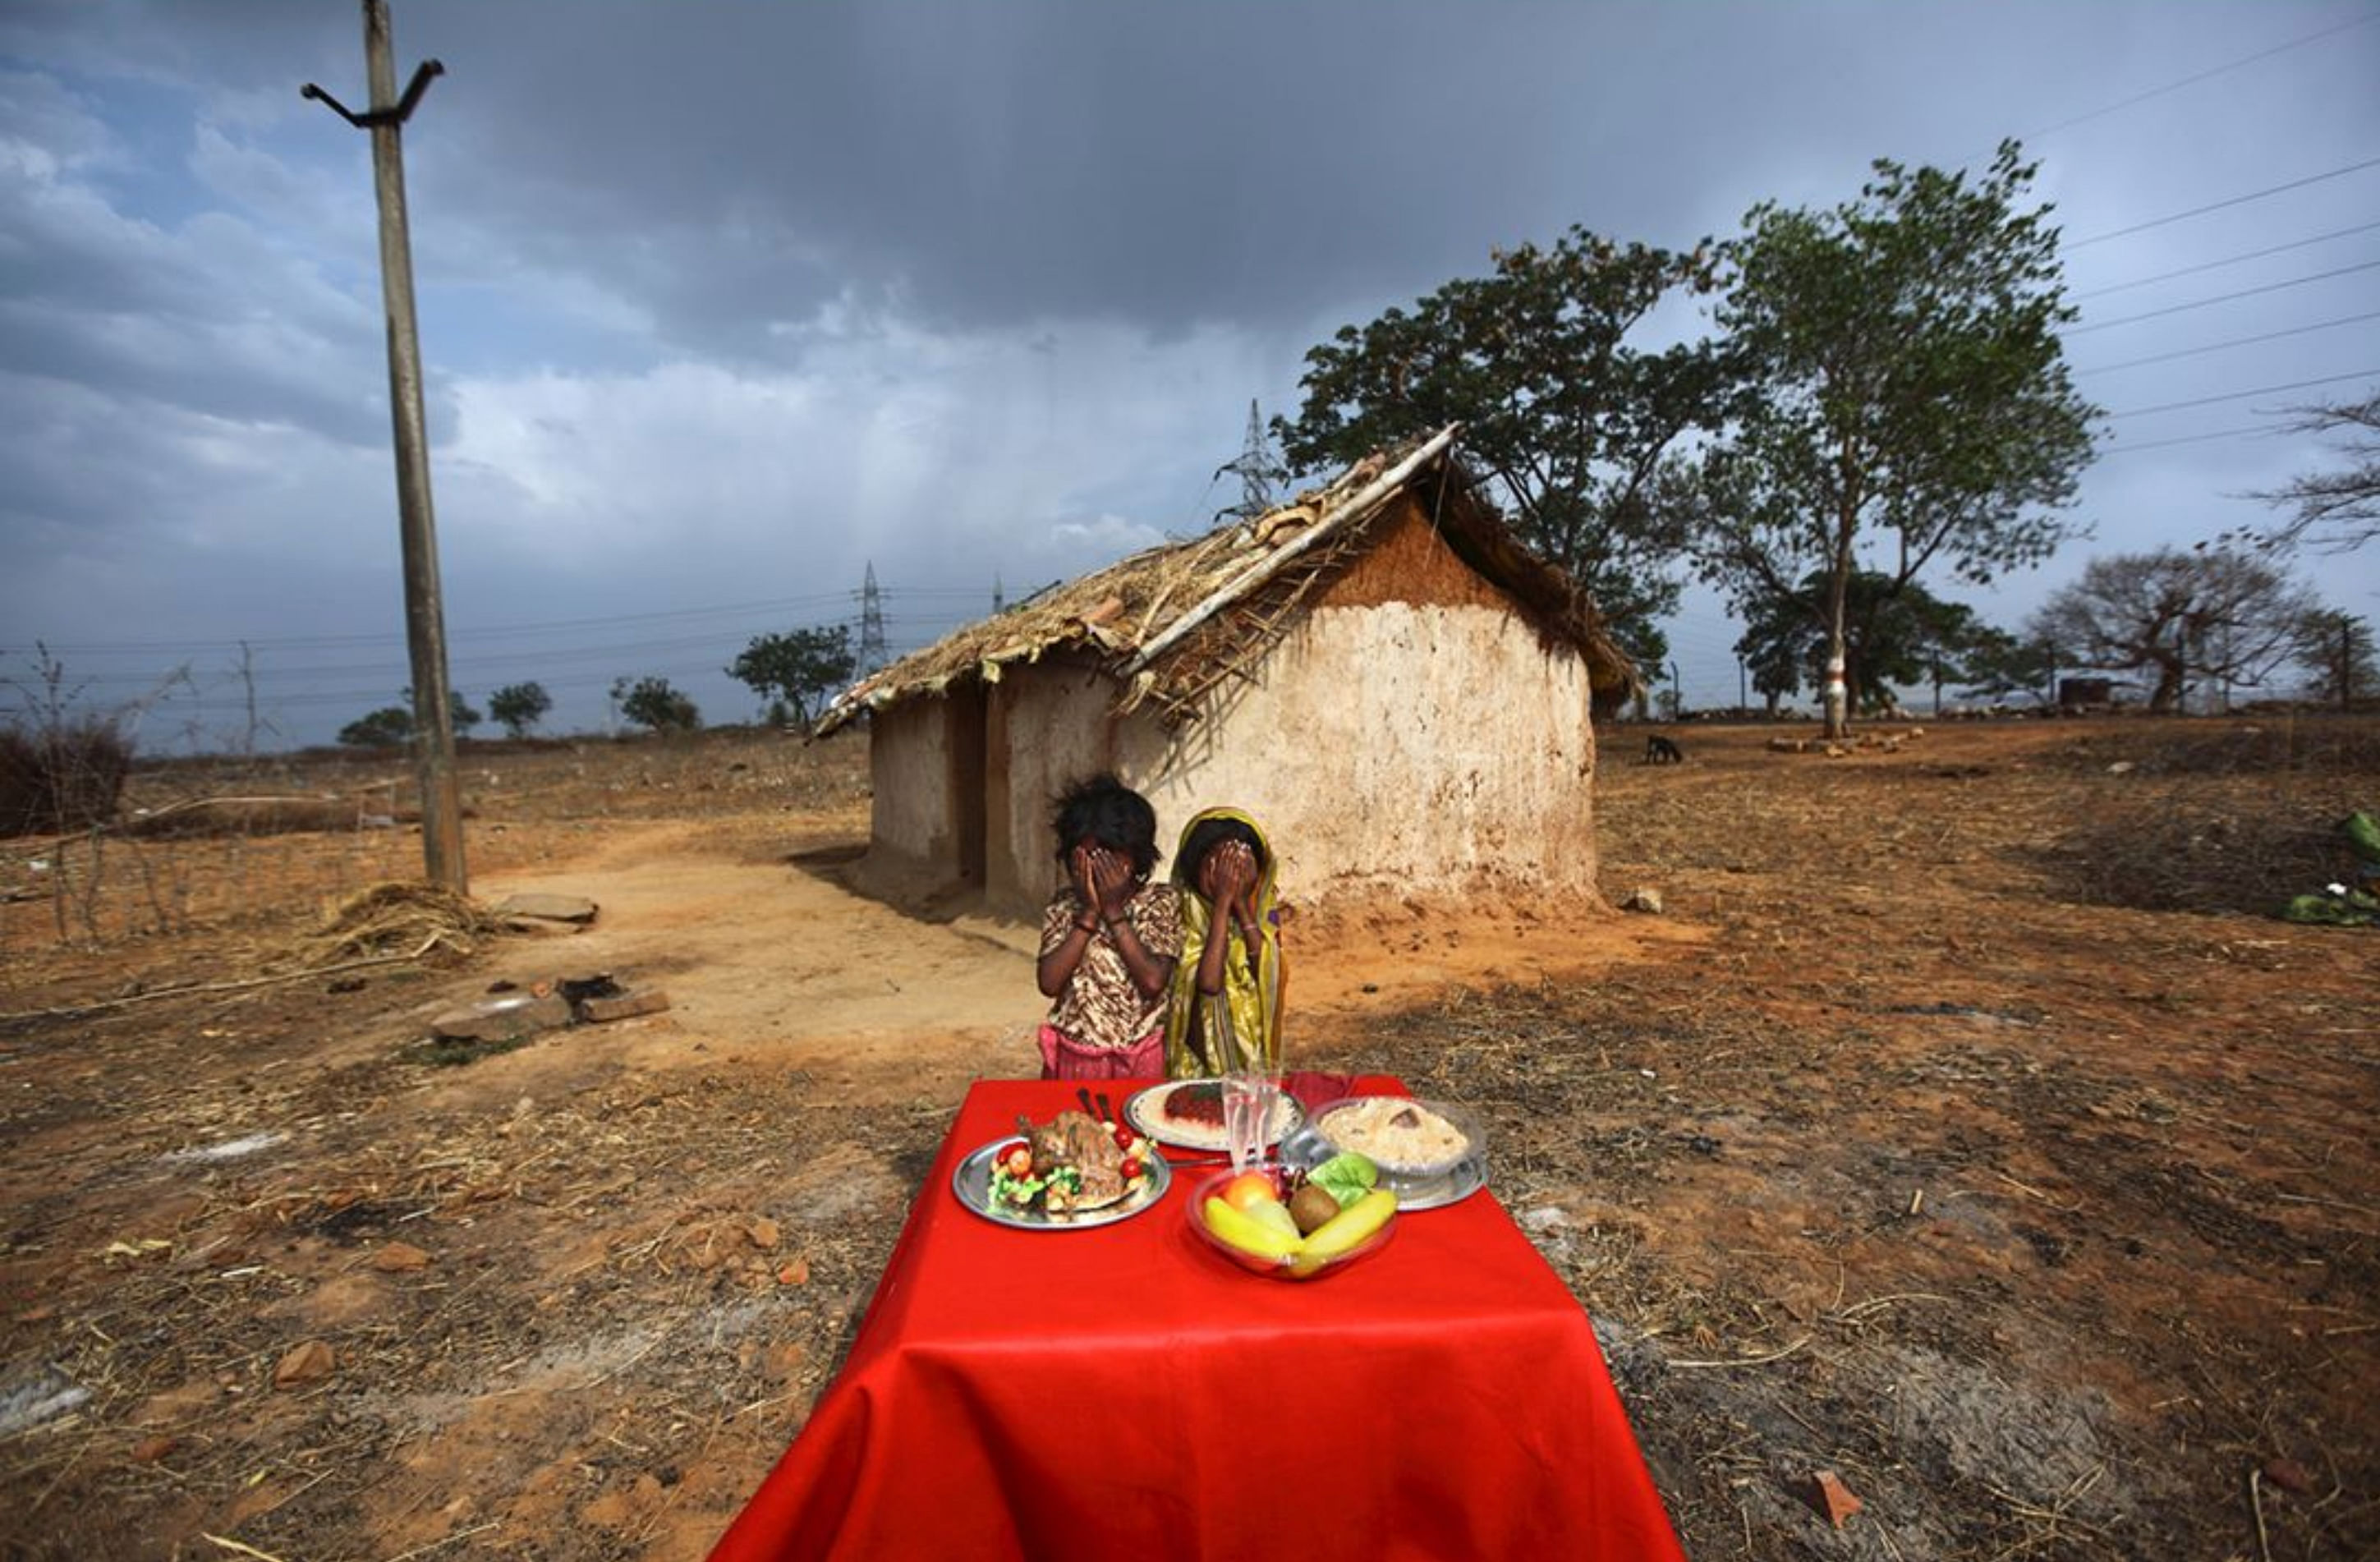 These photos are from UP & Madhya Pradesh two of the poorest states of India | worldpressphoto/ Instagram